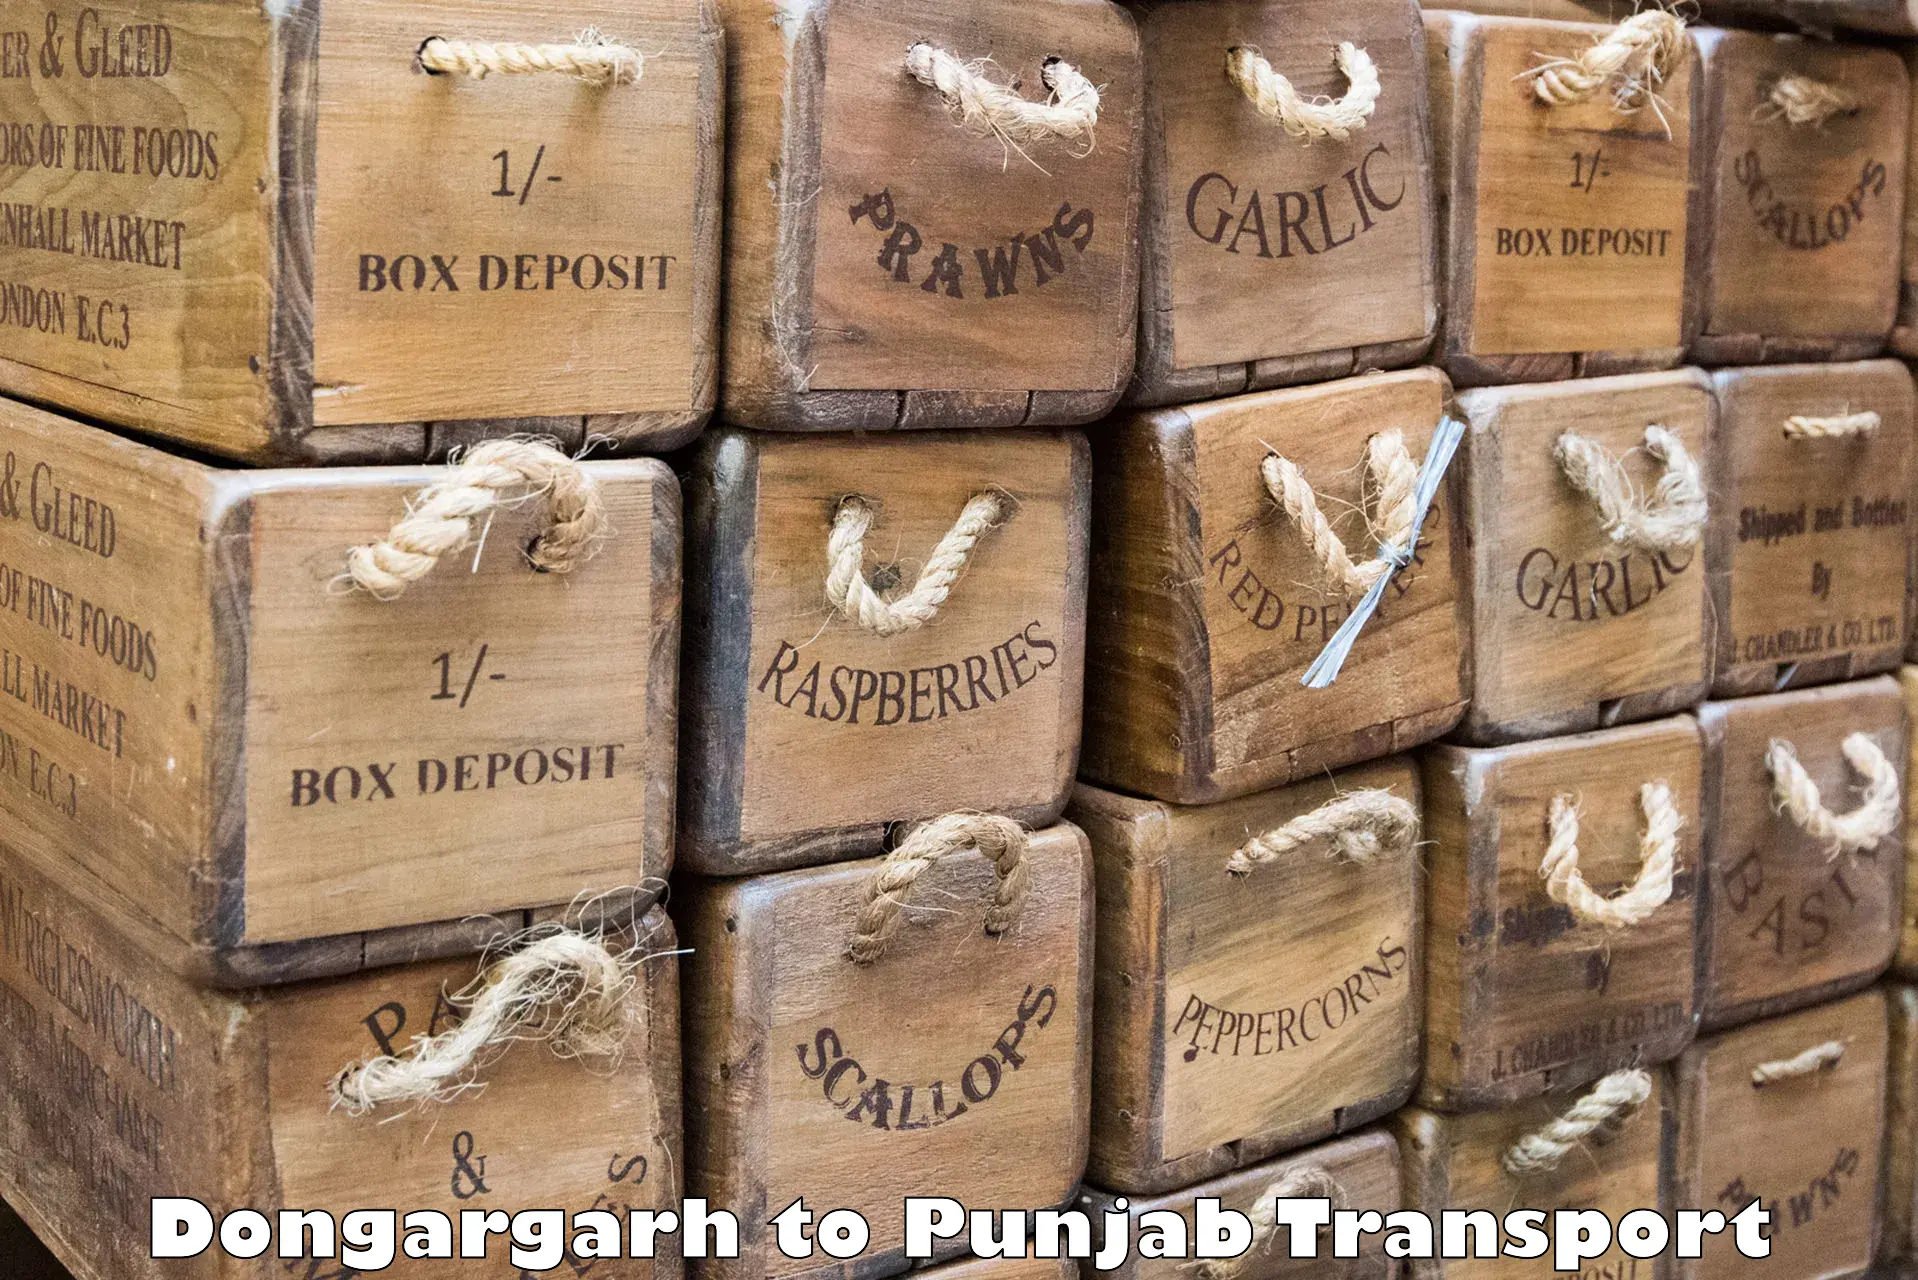 Transportation services Dongargarh to Mohali